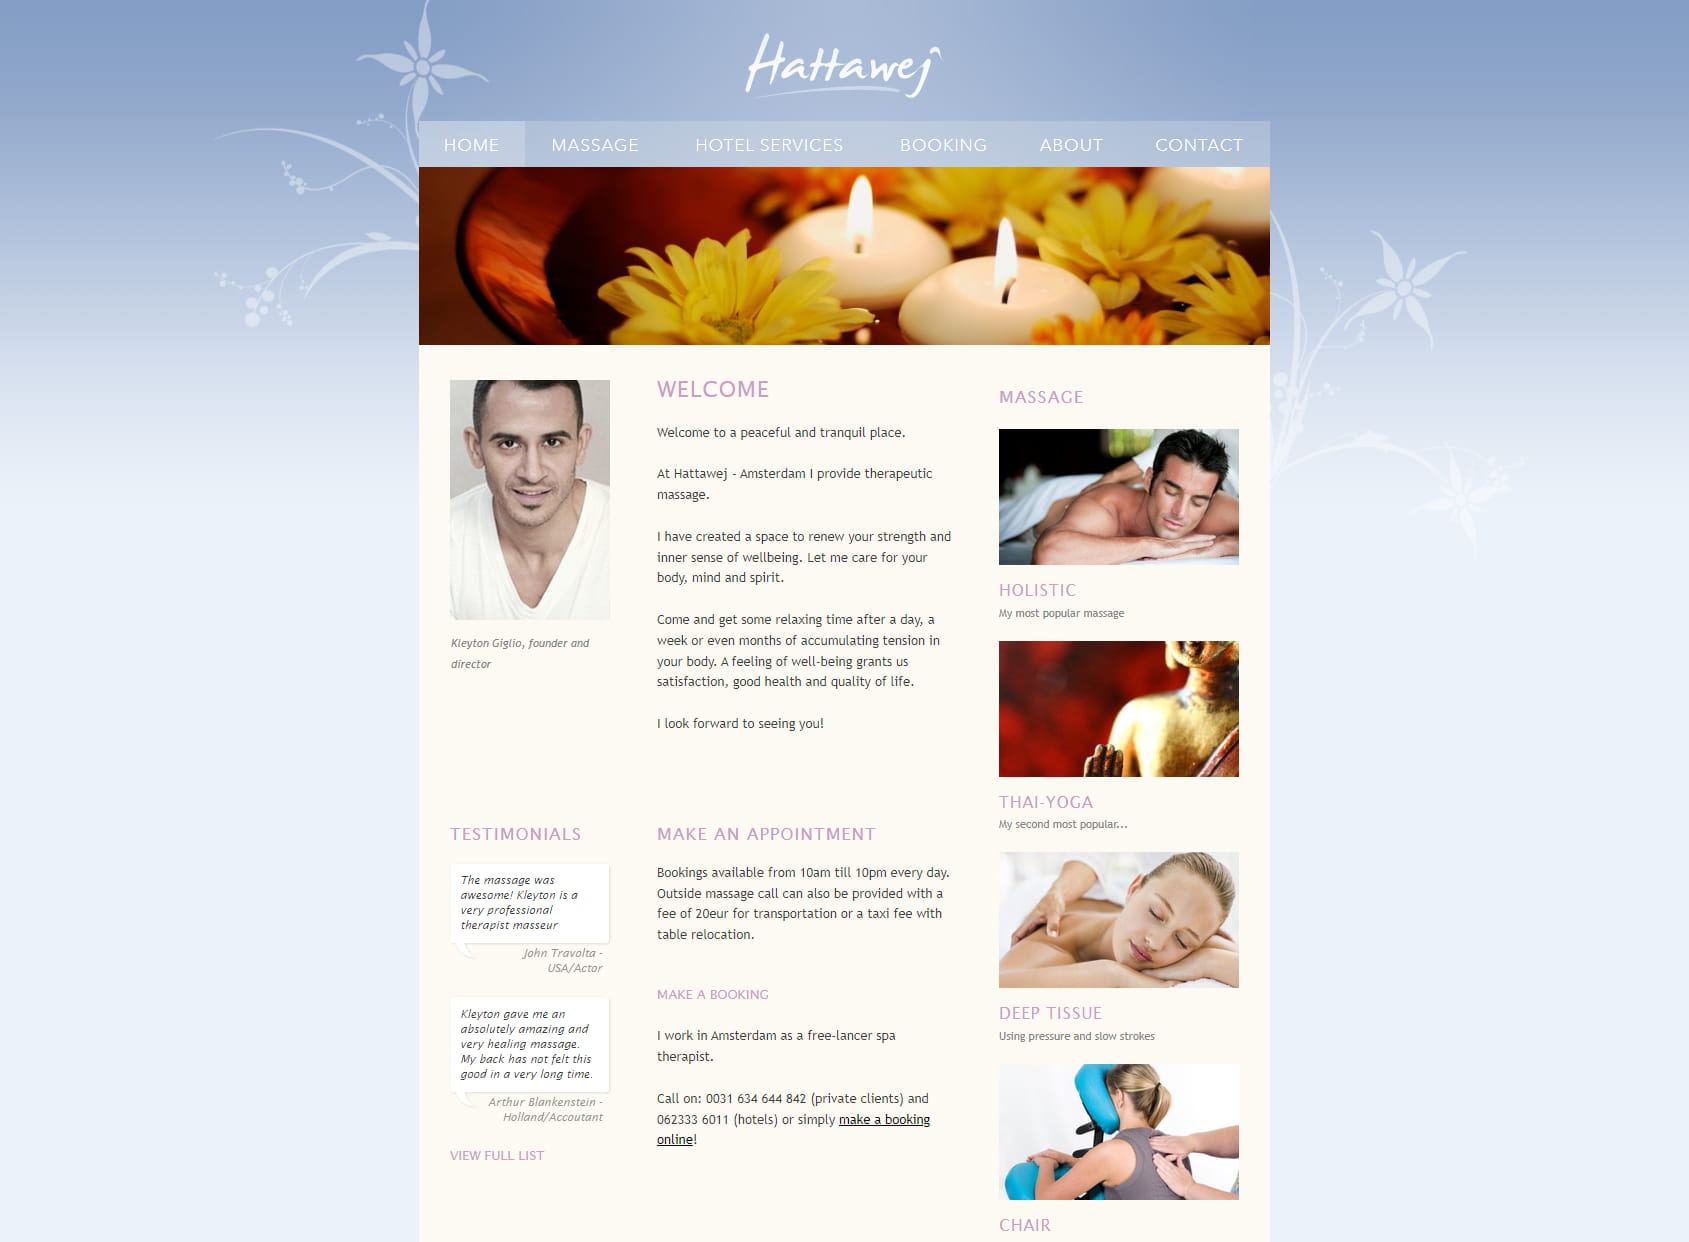 Hattawej spa services